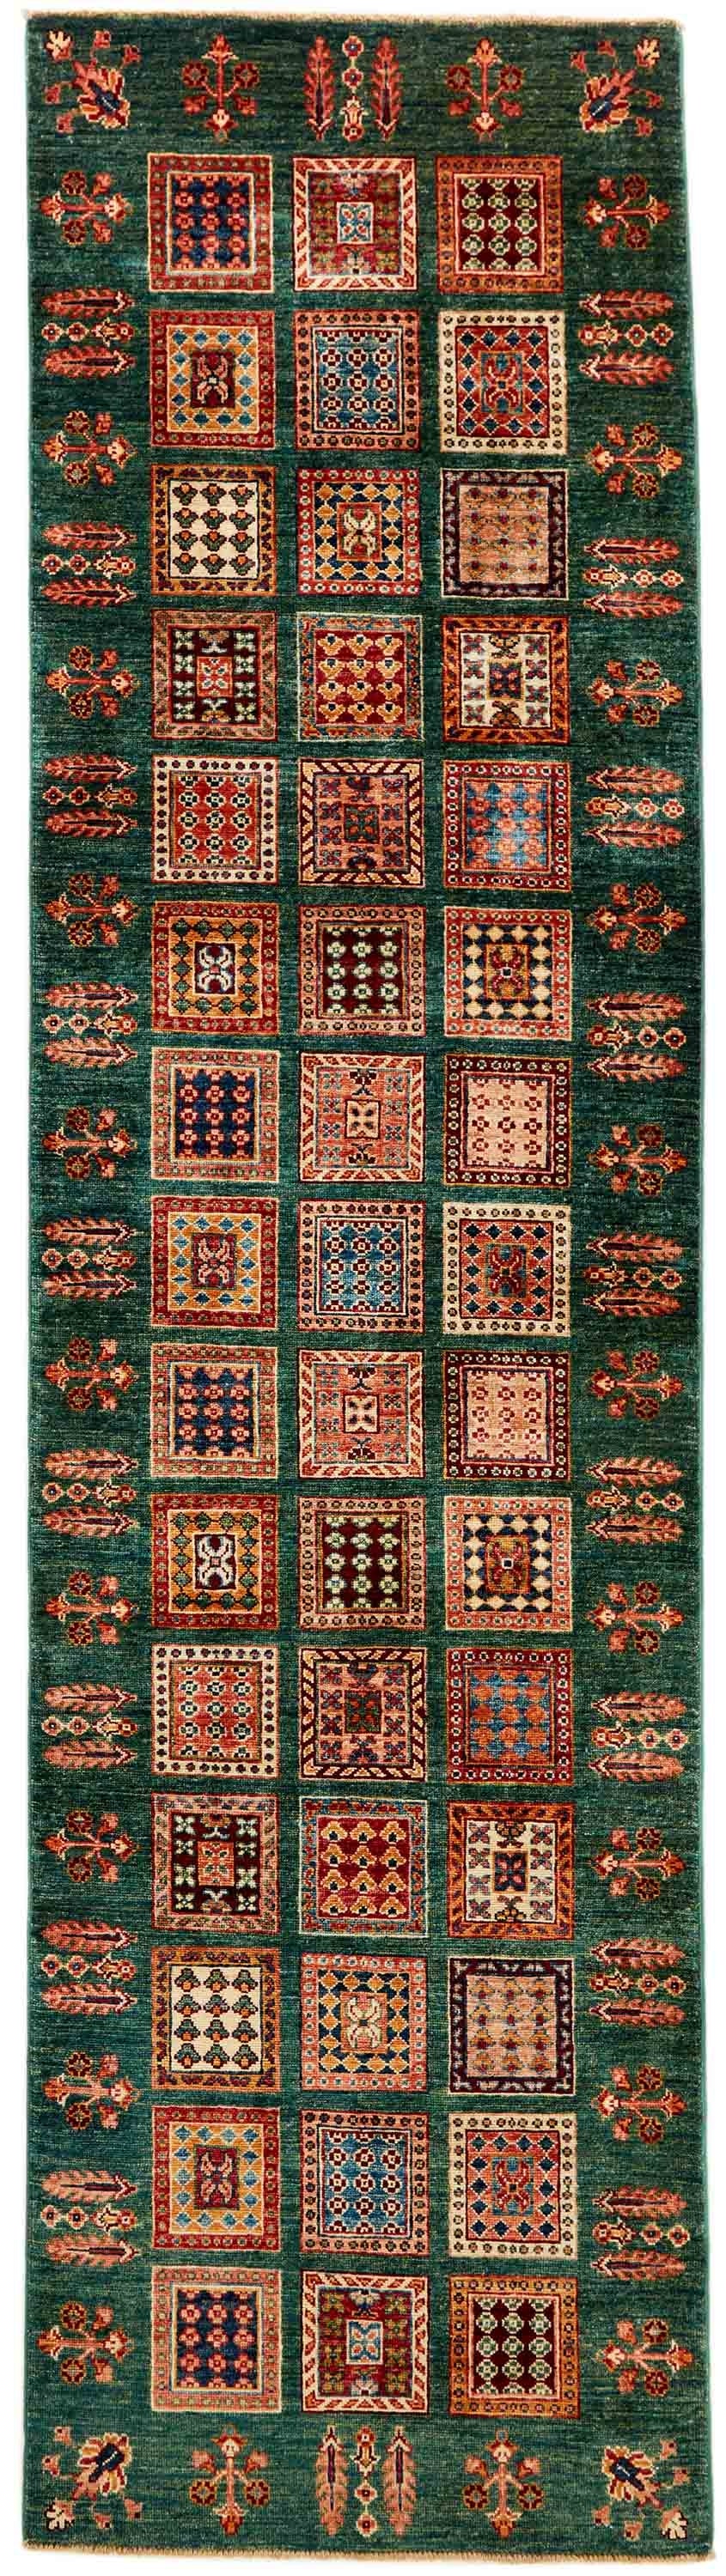 Authentic oriental runner with traditional pattern in red, orange, yellow, blue, green, beige and brown